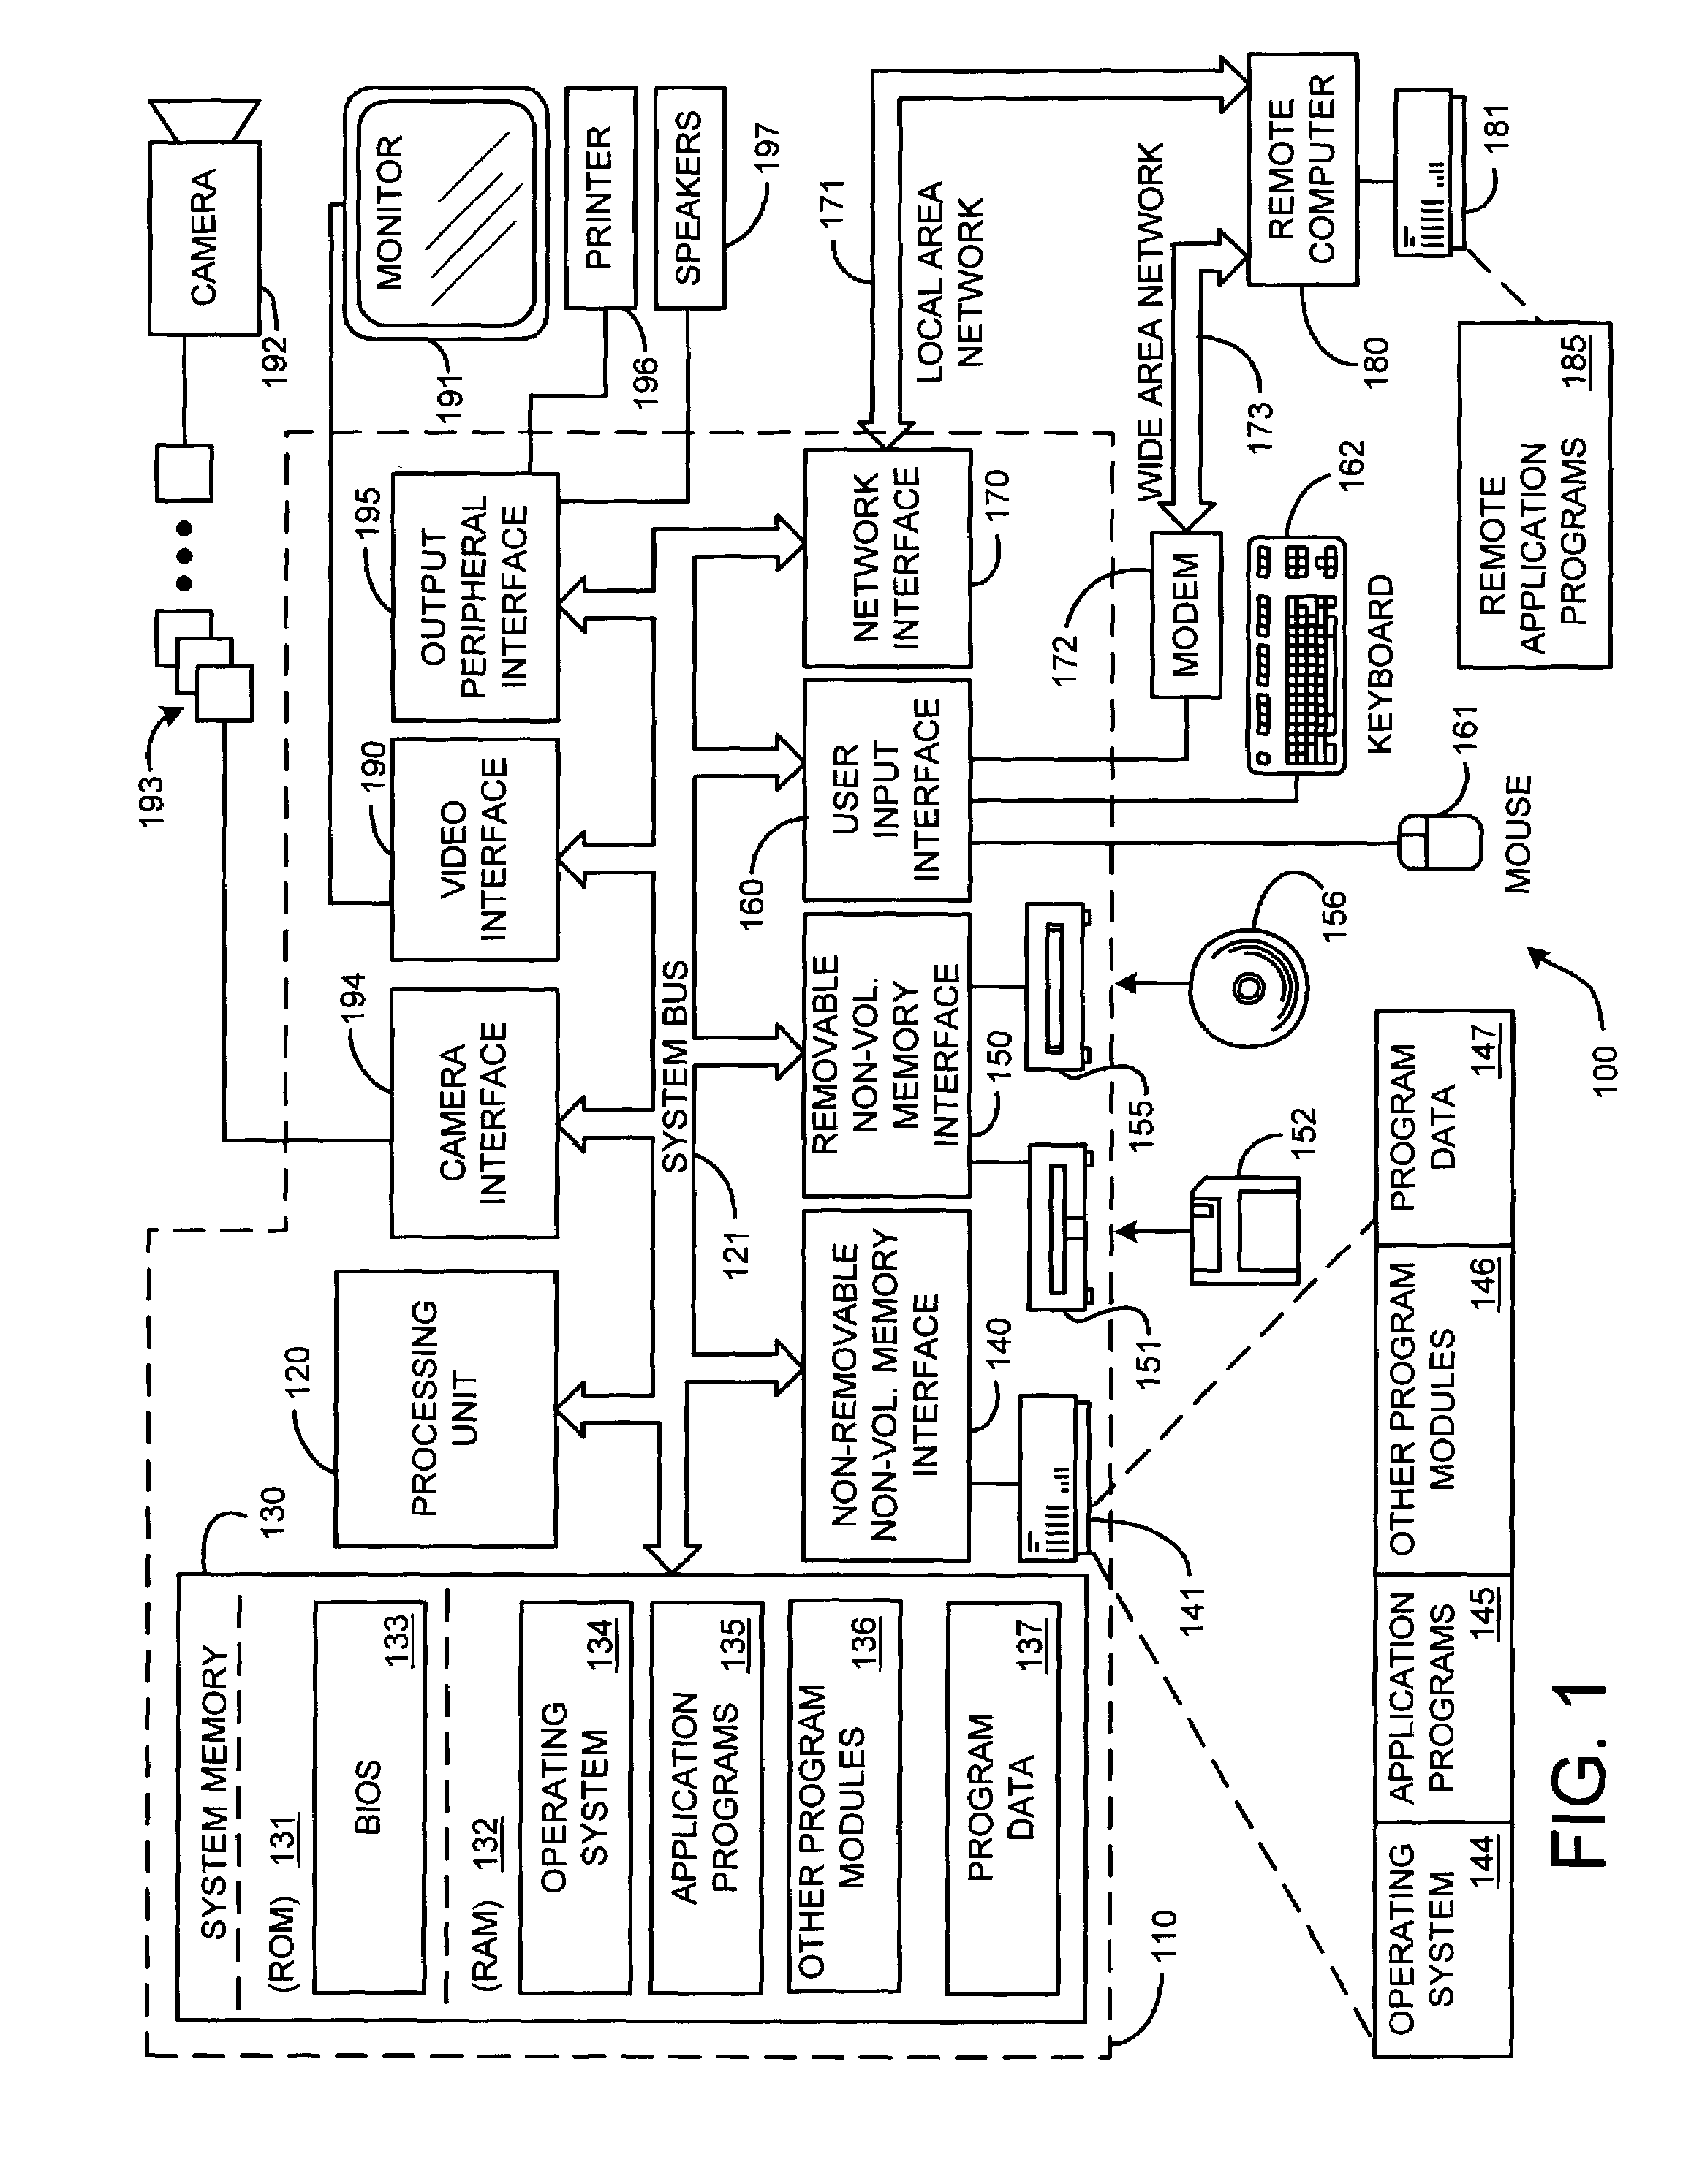 System and method for automatically learning flexible sprites in video layers